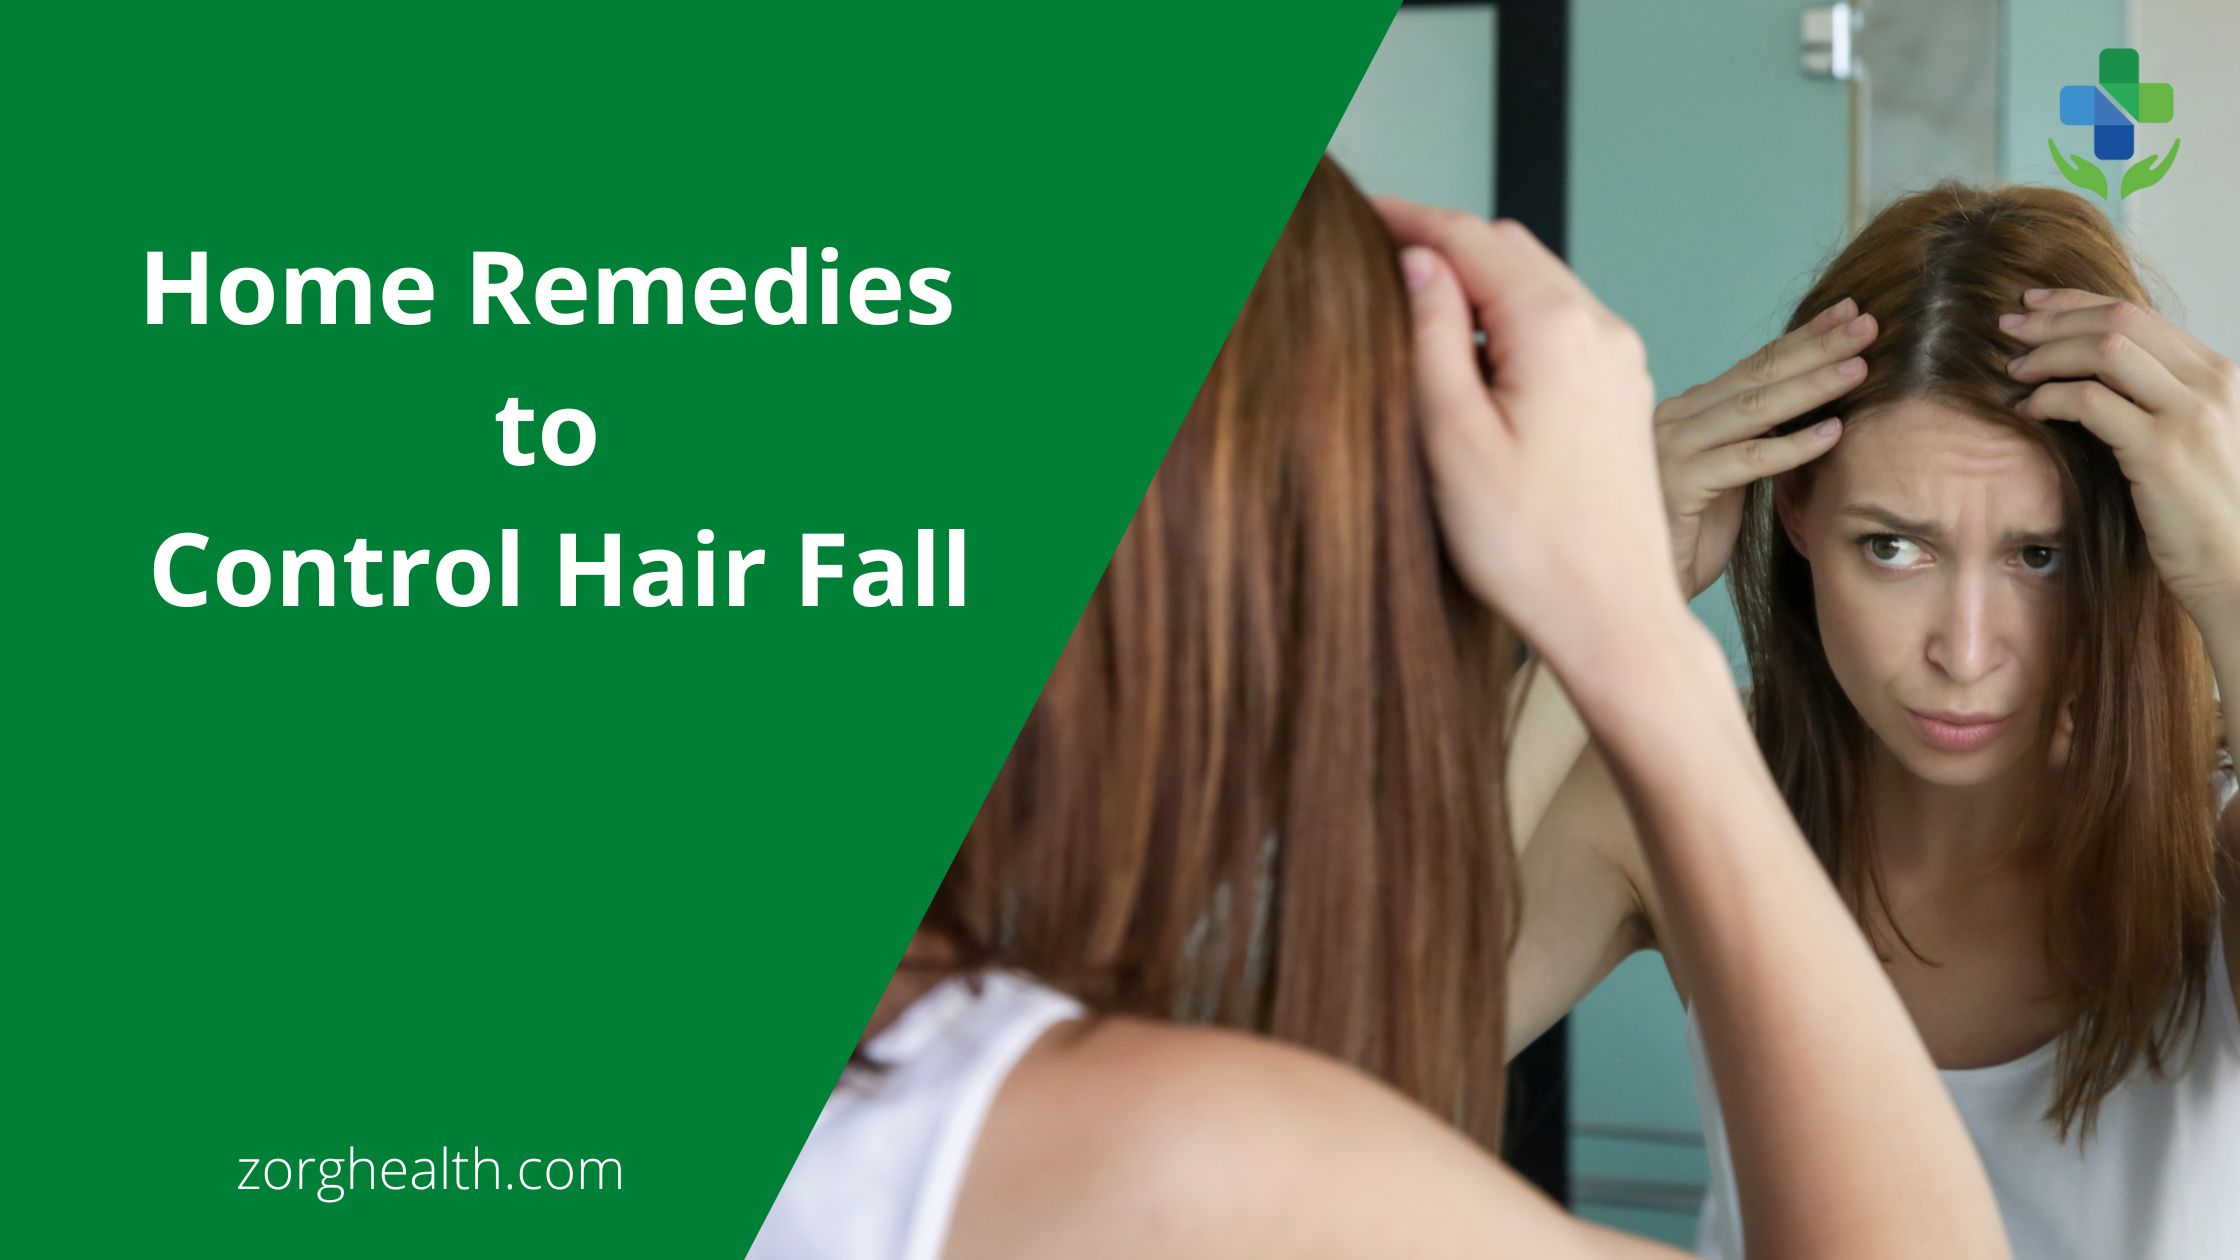 Home Remedies to Control Hair Fall - Zorg Health